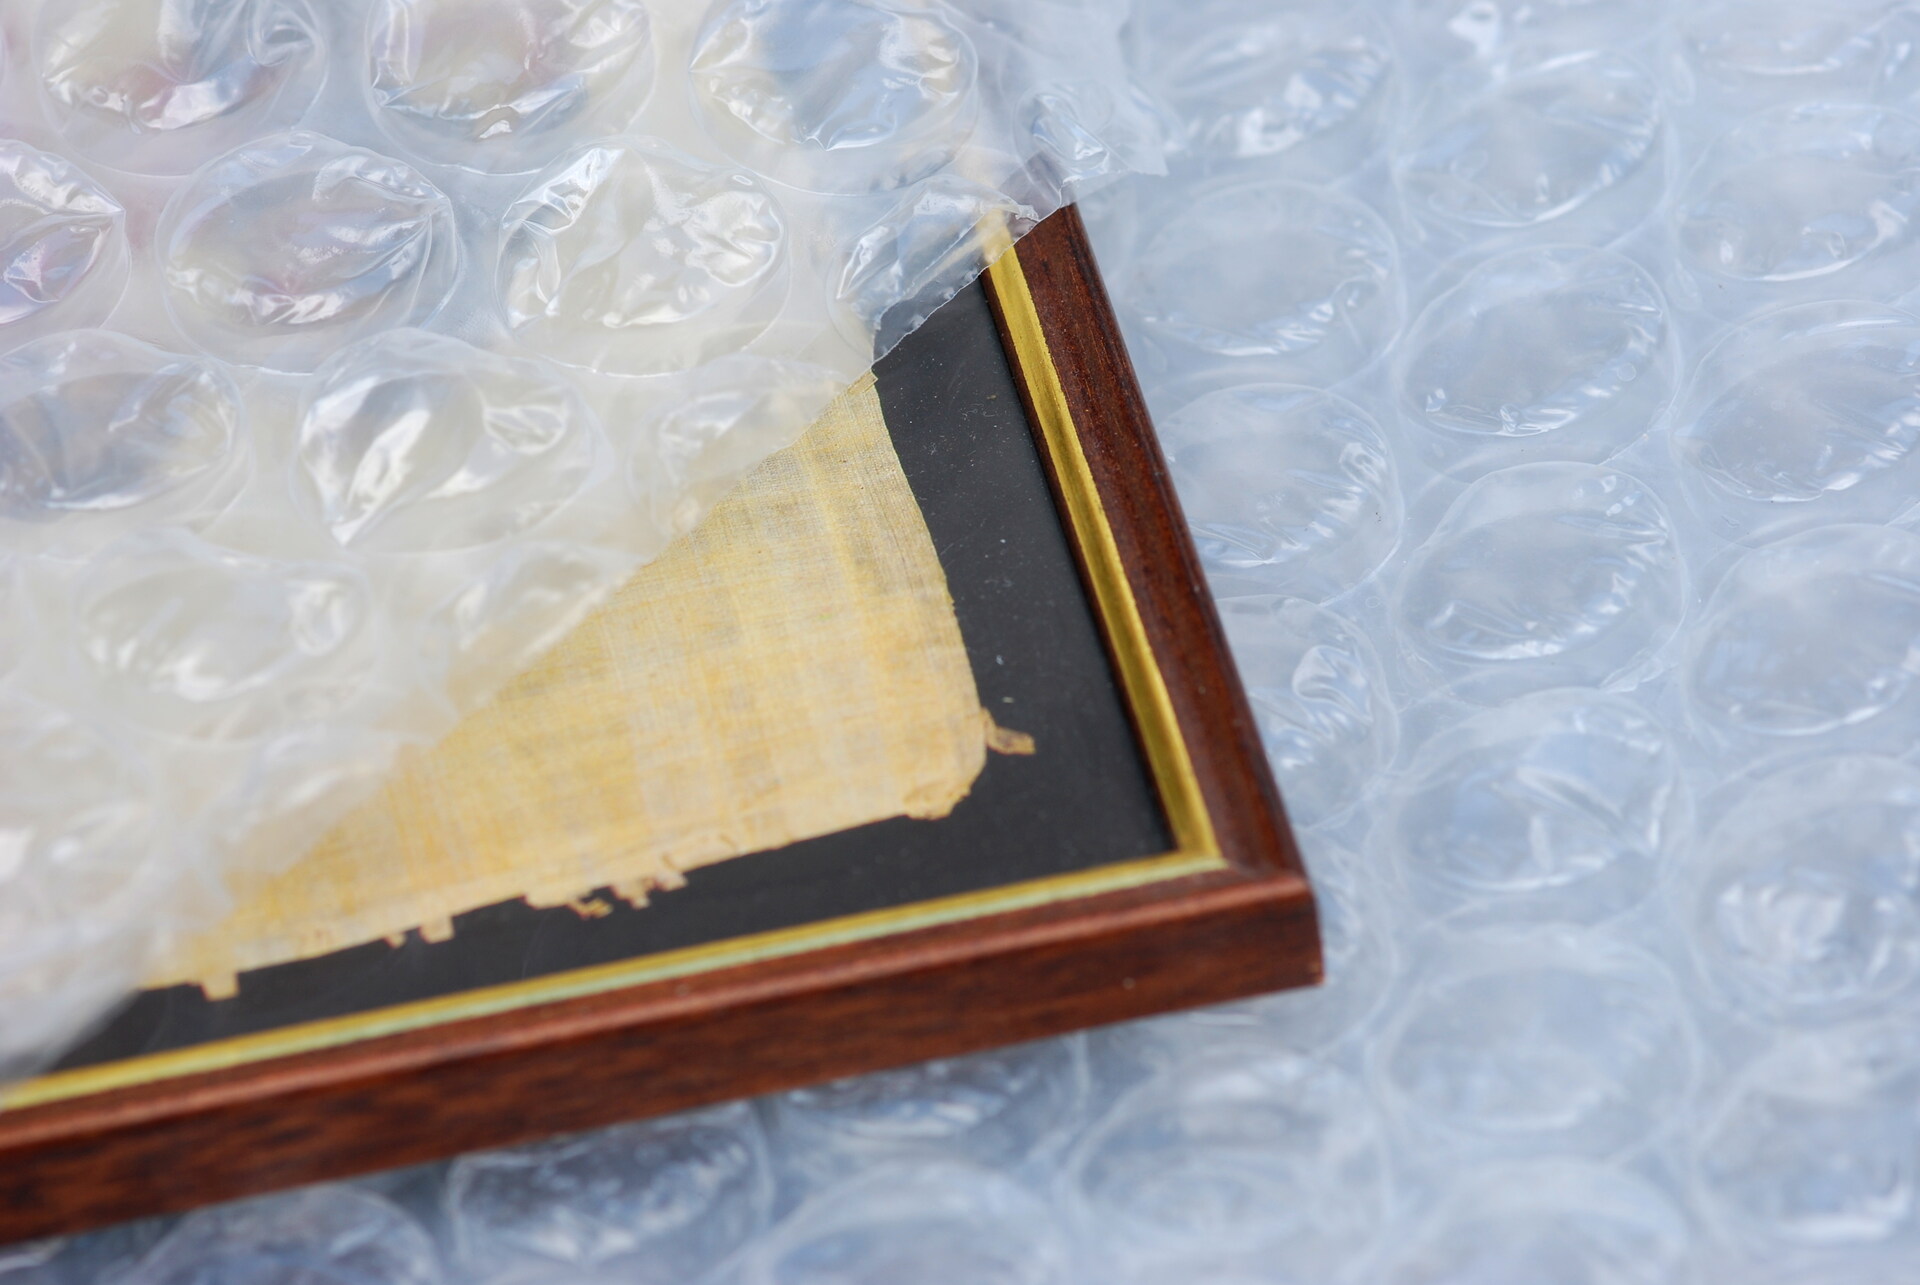 A frame wrapped in bubble wrap